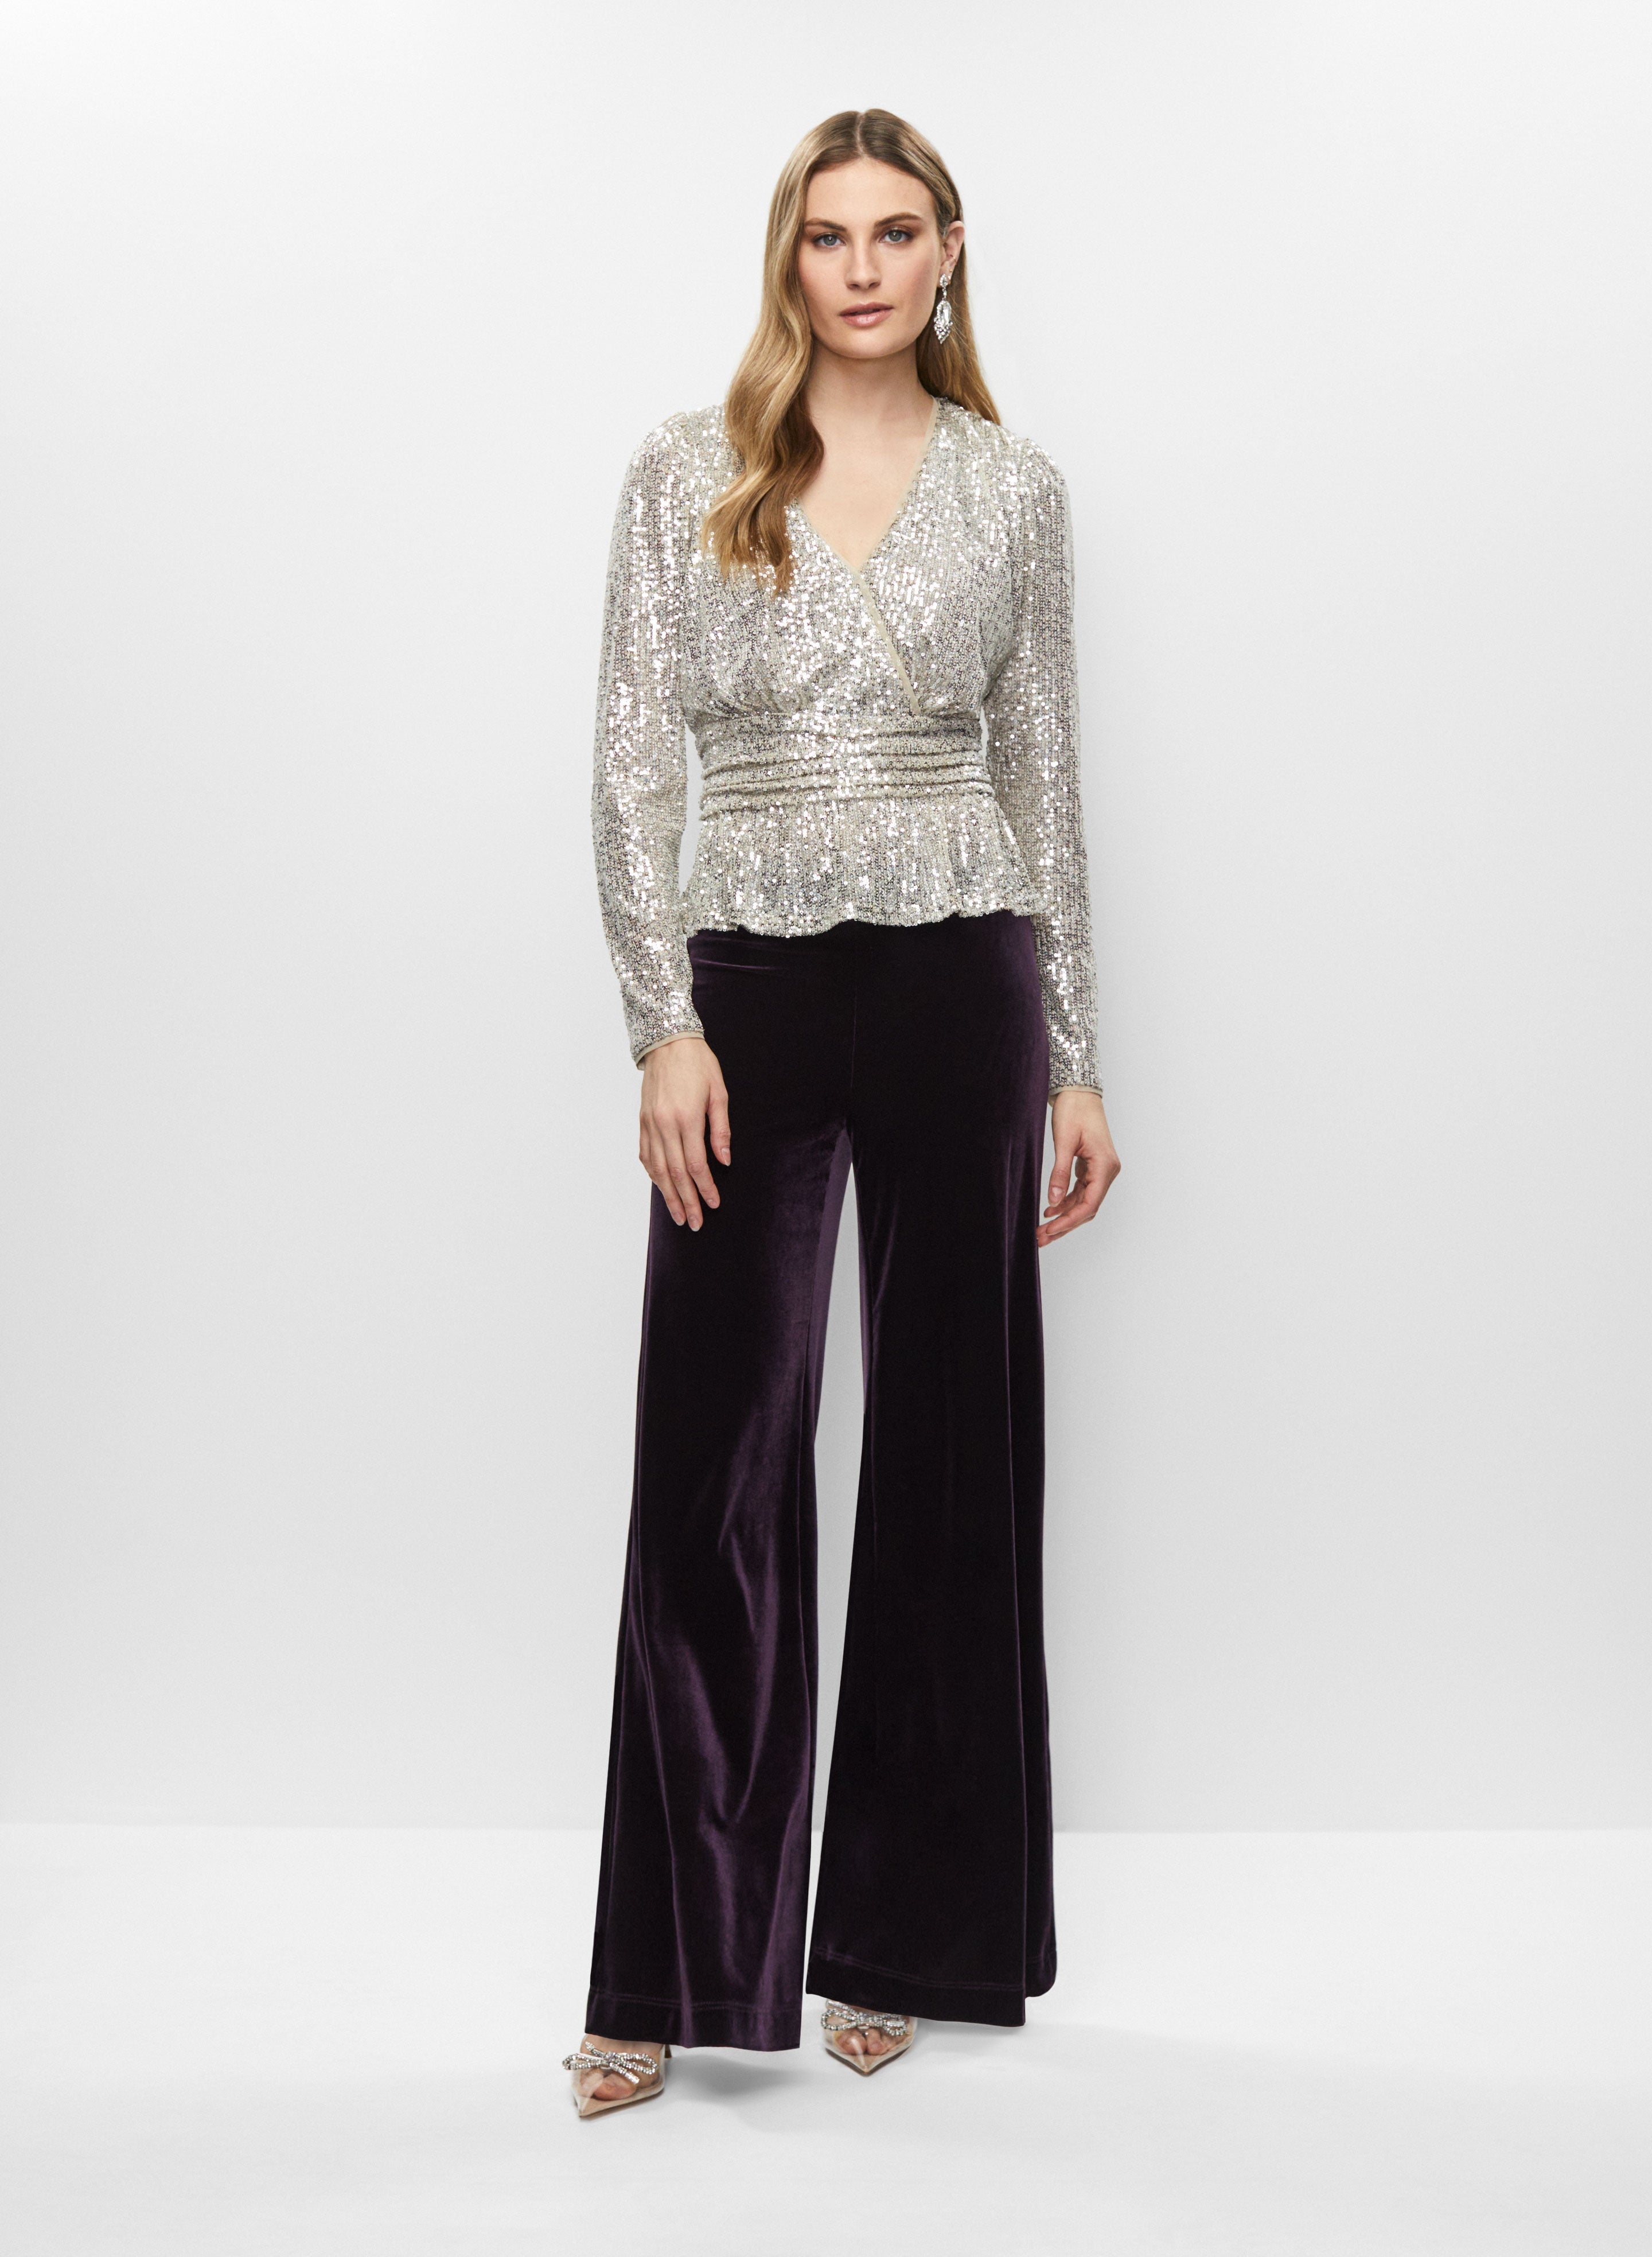 Sequined Top & Velour Pants